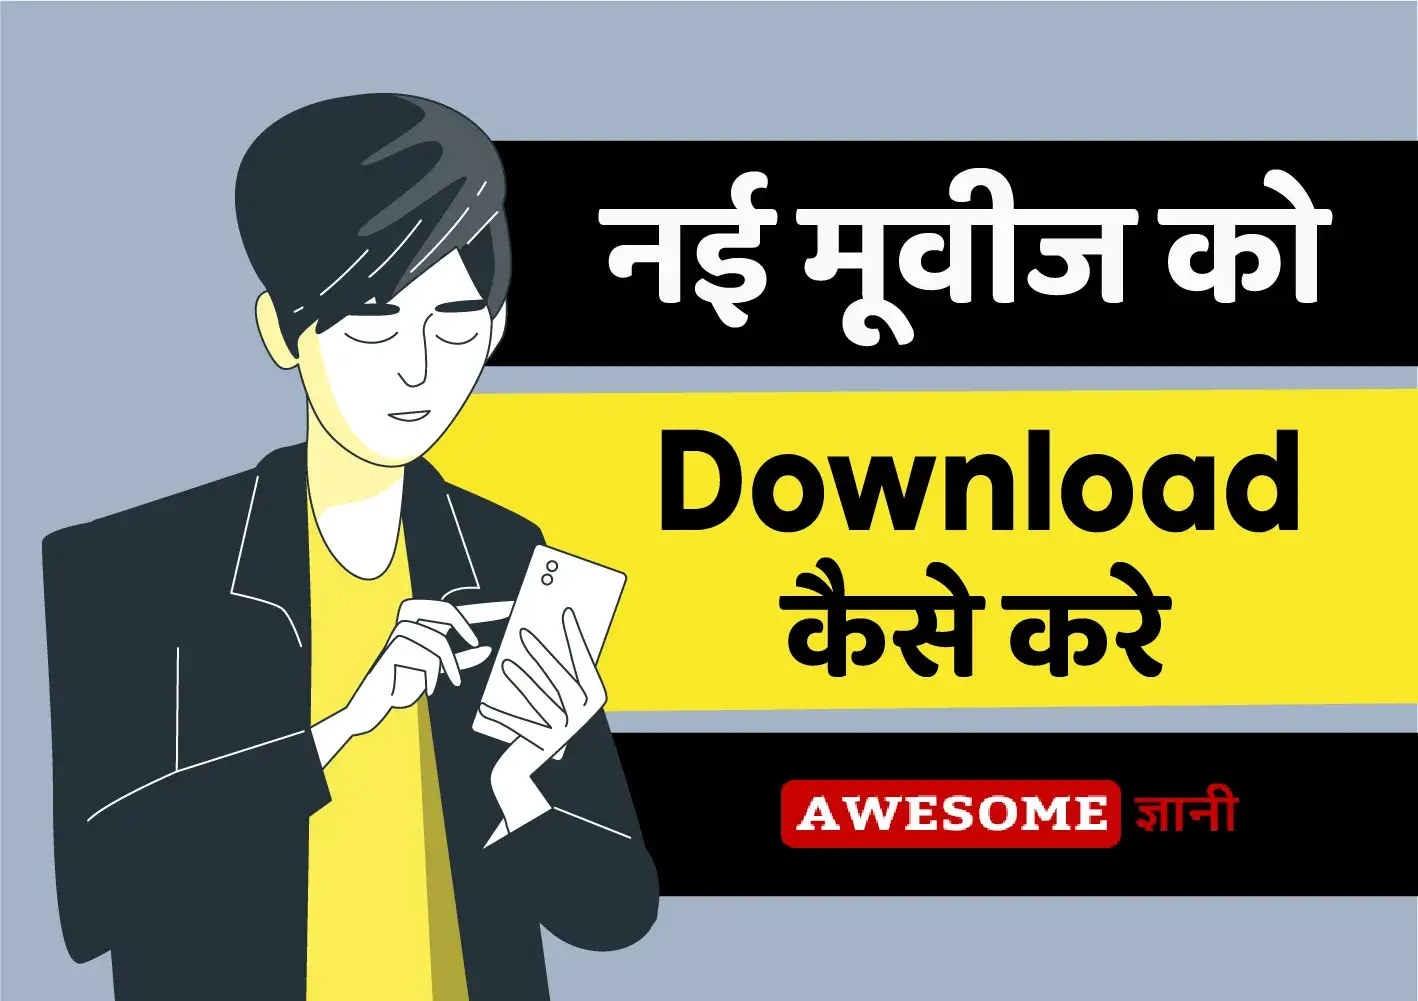 How to Download Bollywood Movies in Hindi